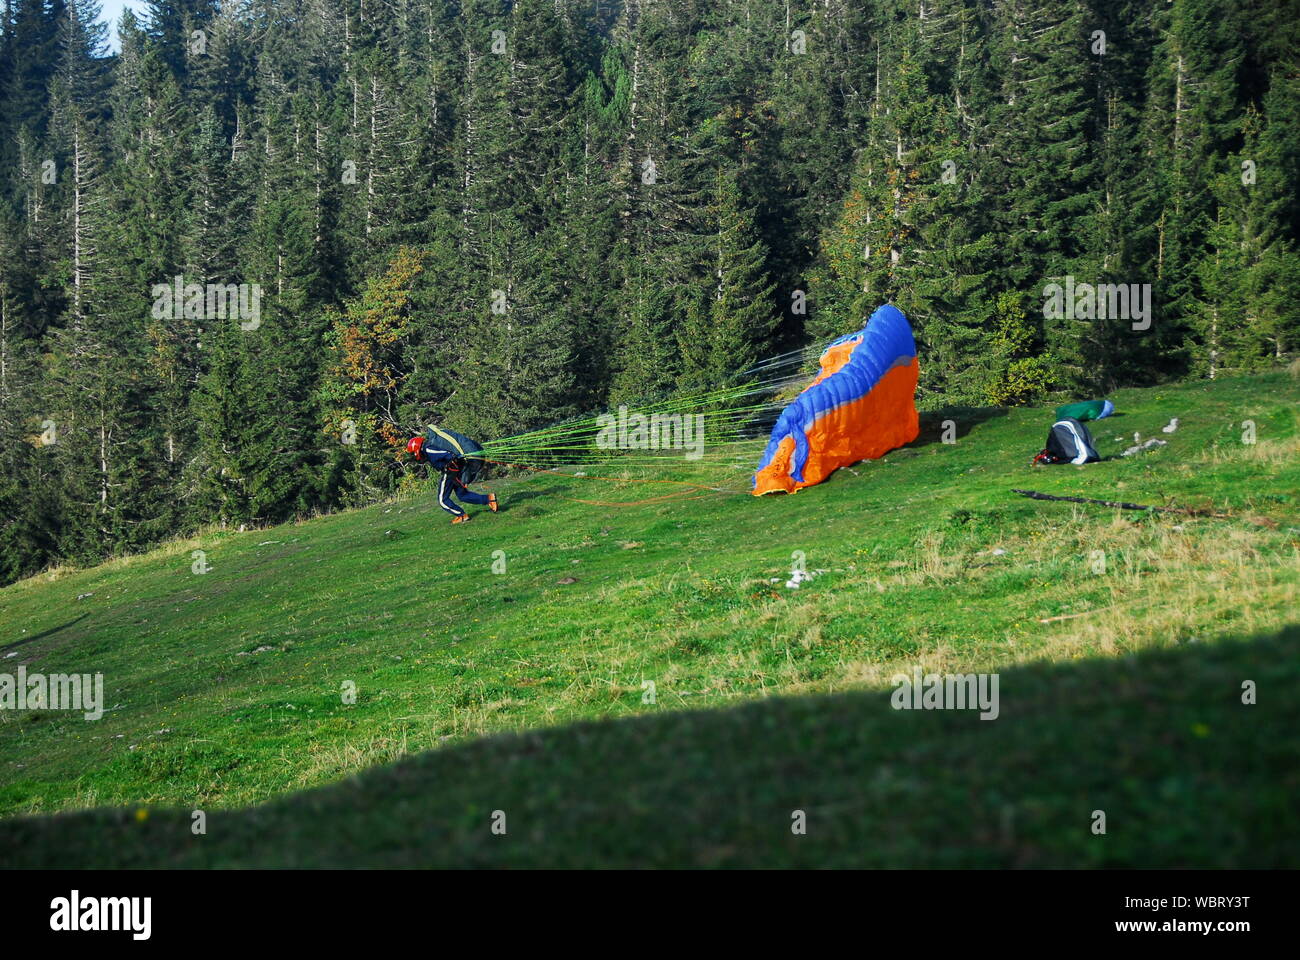 Person Launching Parachute On Field Stock Photo